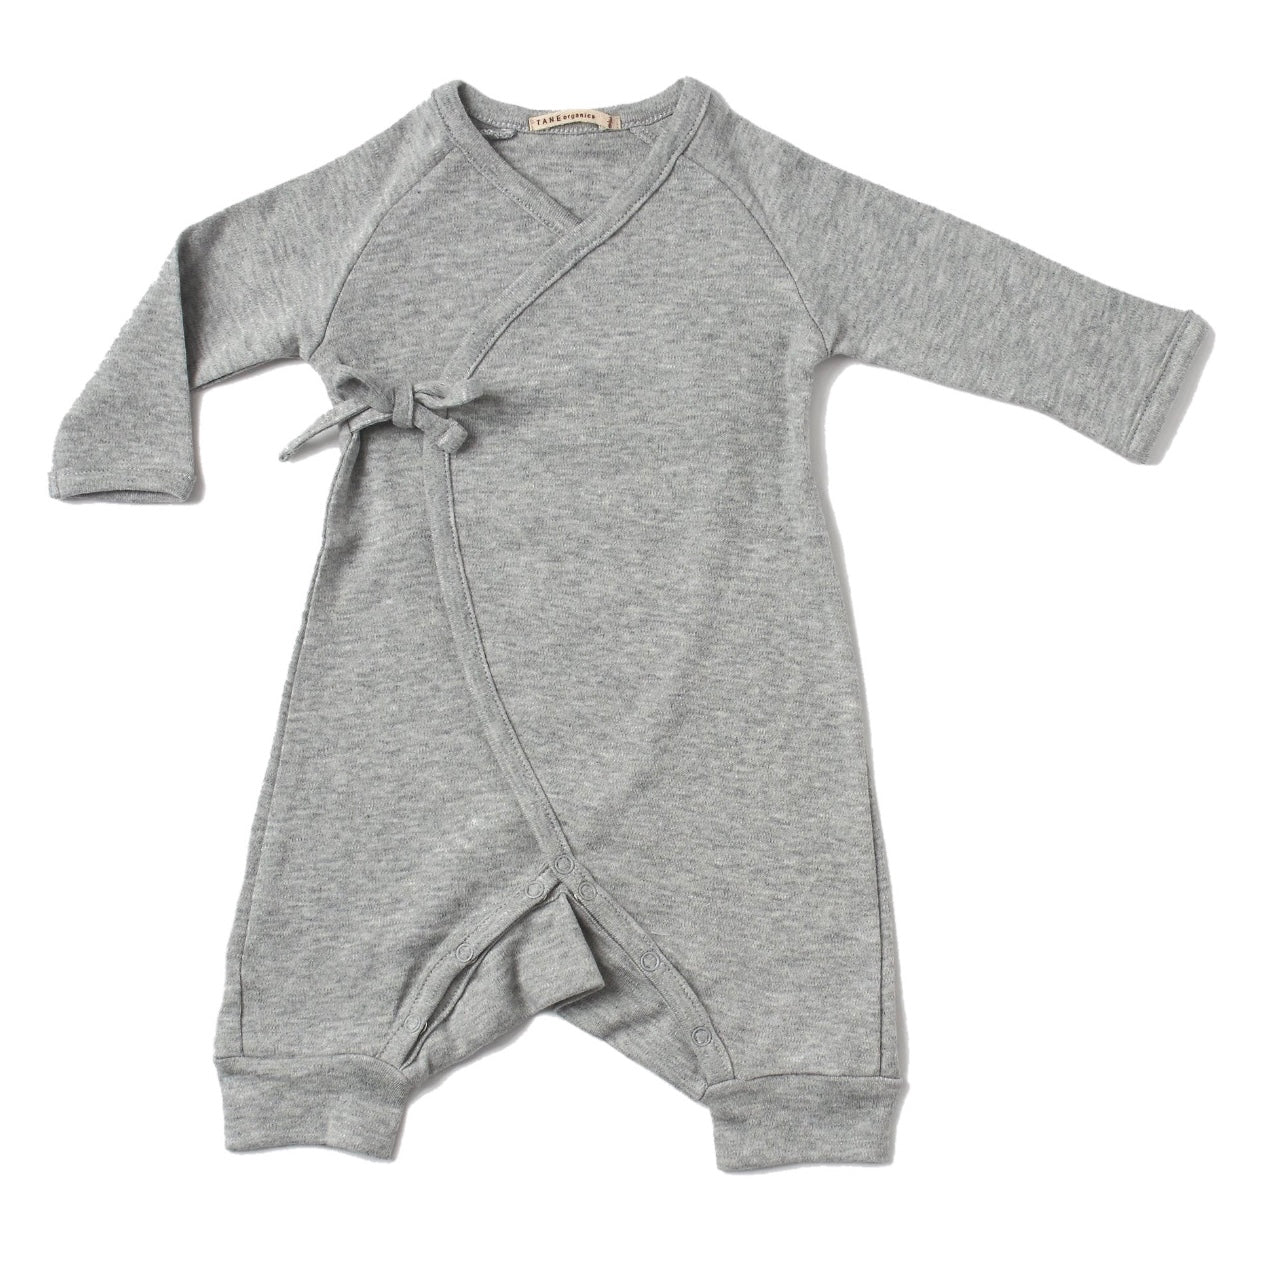 Kimono Onesie with Leggings in Brushed Heathered Knit